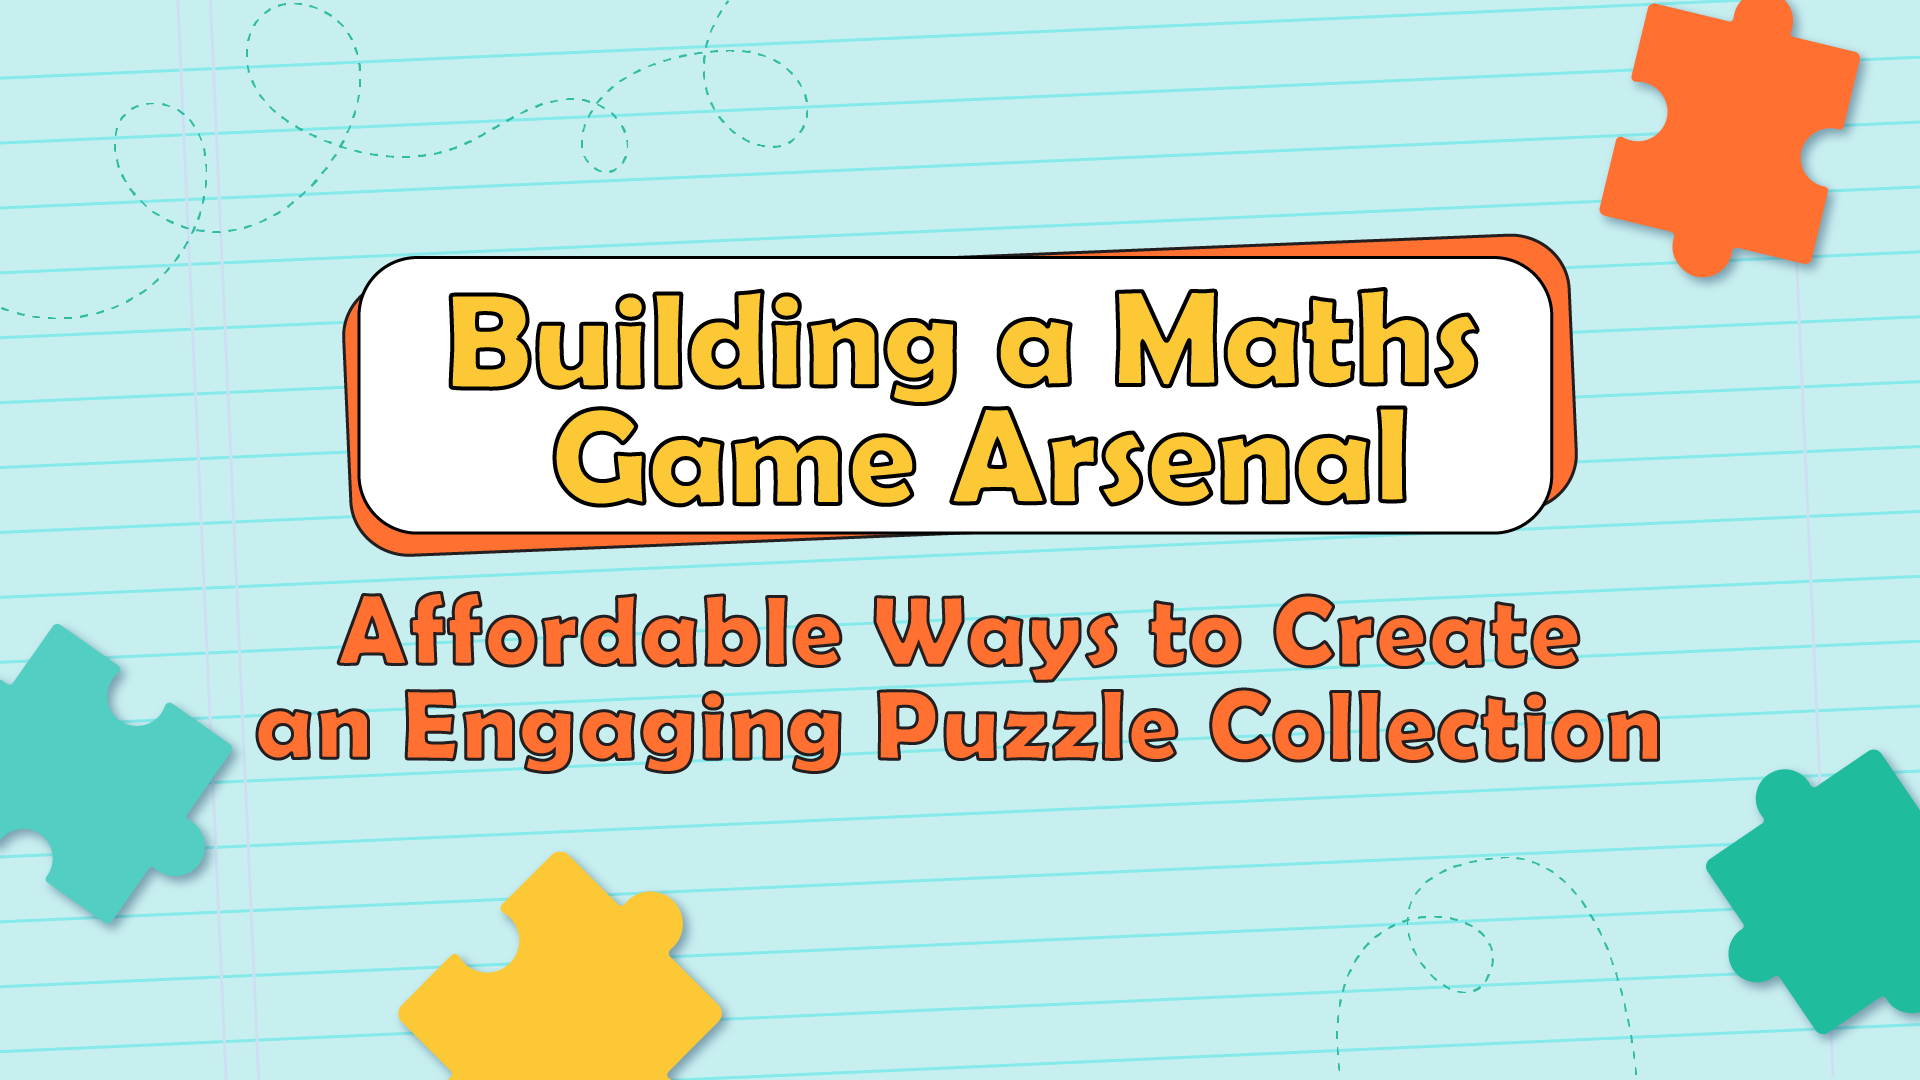 Building a Maths Game Arsenal: Affordable Ways to Create an Engaging Puzzle Collection